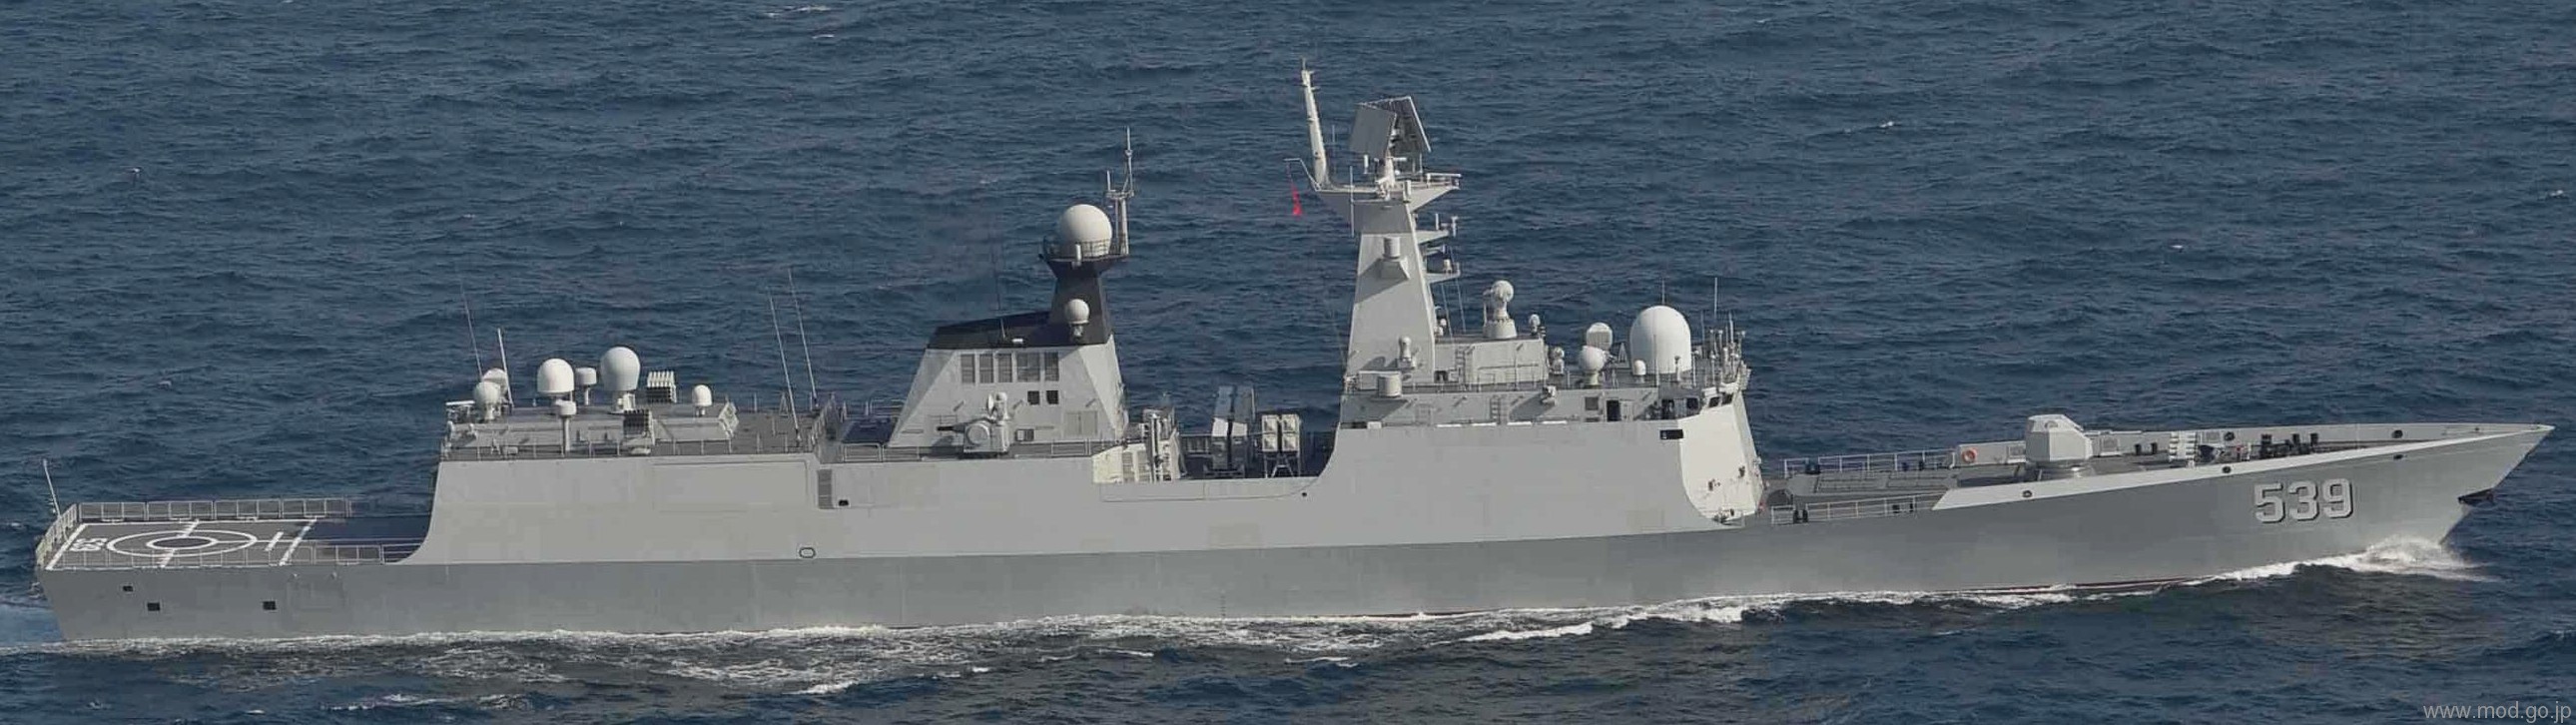 ffg-539 plans wuhu type 054a jiangkai ii class guided missile frigate china people's liberation army navy 02